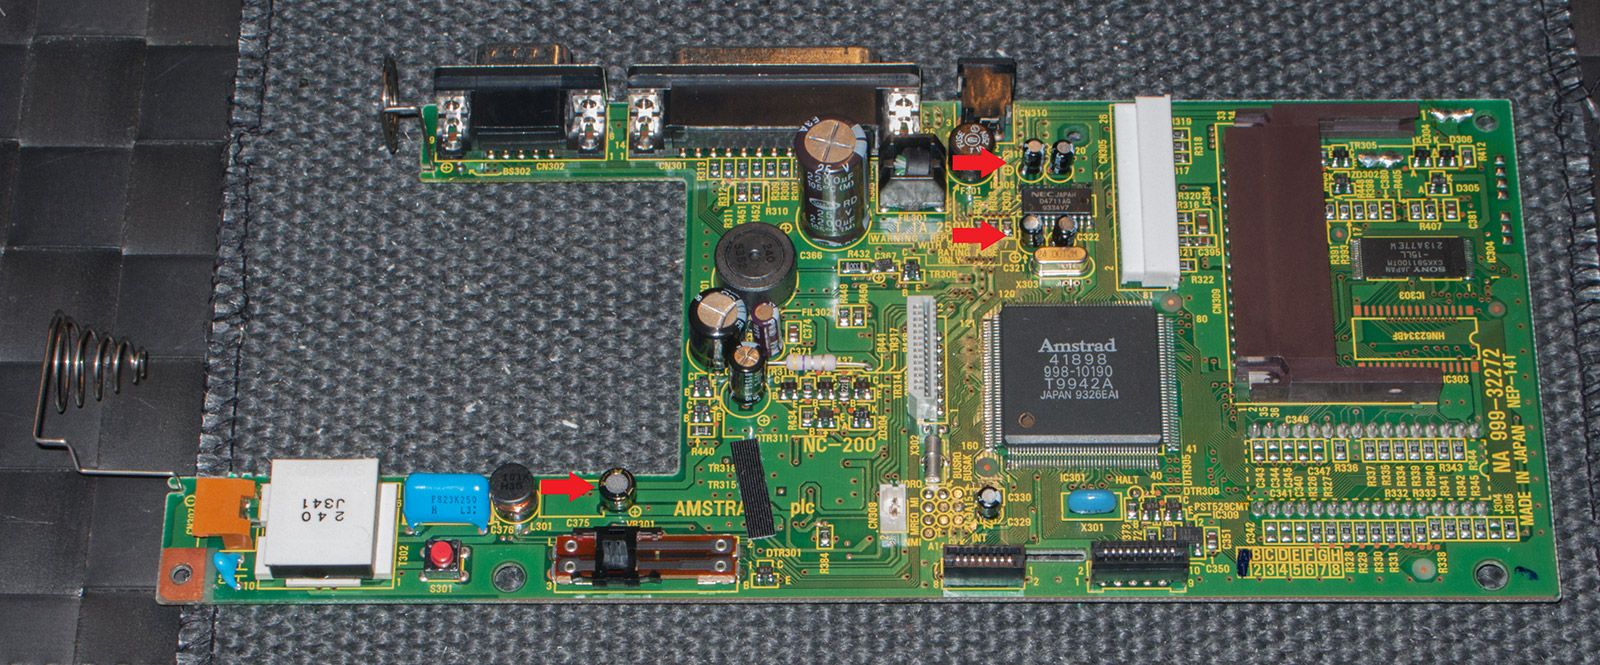 mainboard of the Amstrad Notepad NC200